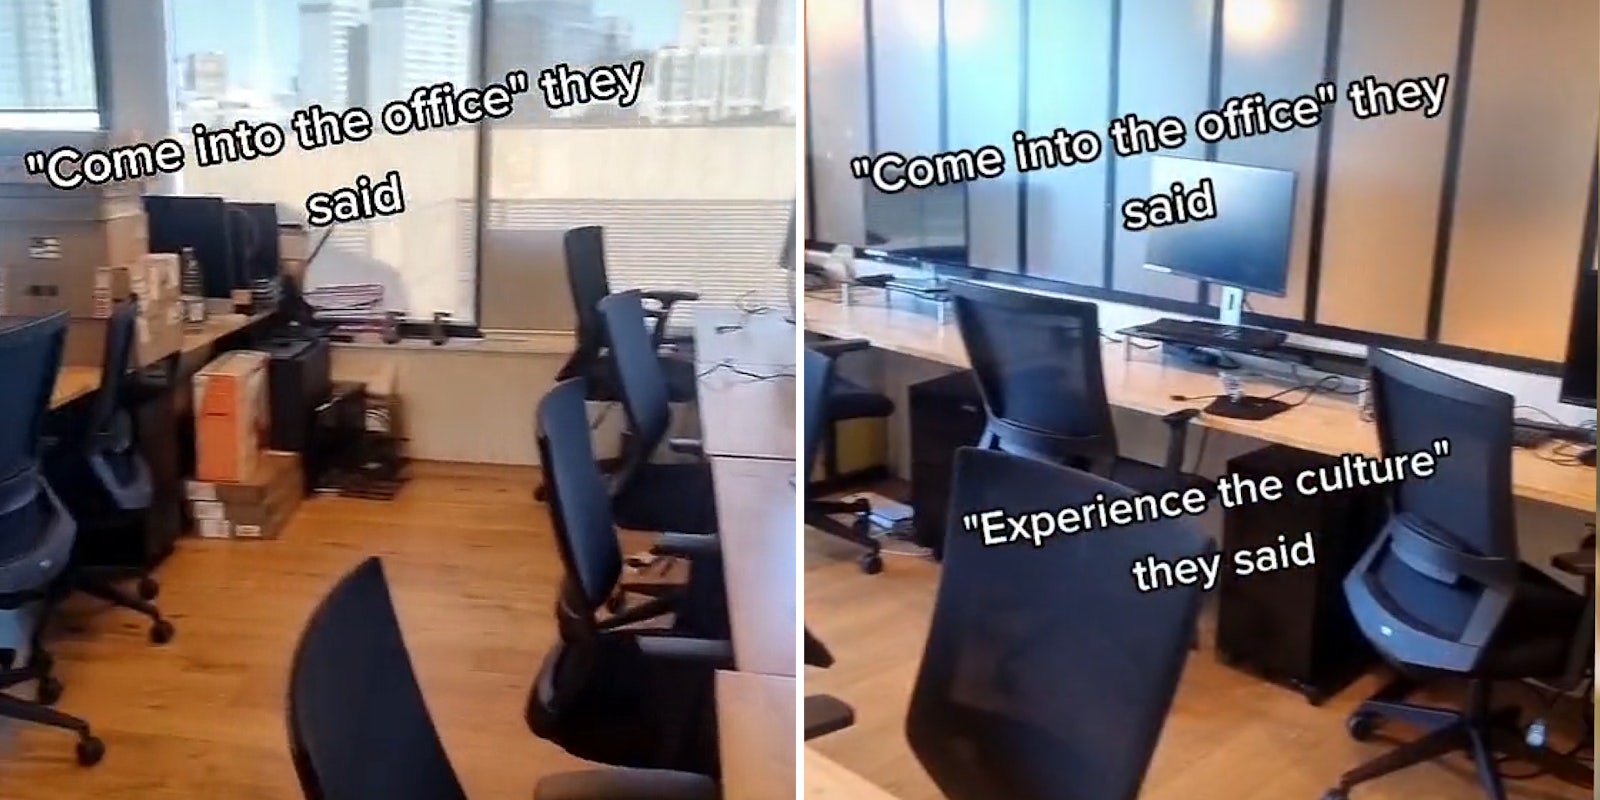 Empty office chairs in office caption 'Come into office they said' (l) empty office chairs in office caption 'Come into the office they said' 'Experience the culture they said' (r)